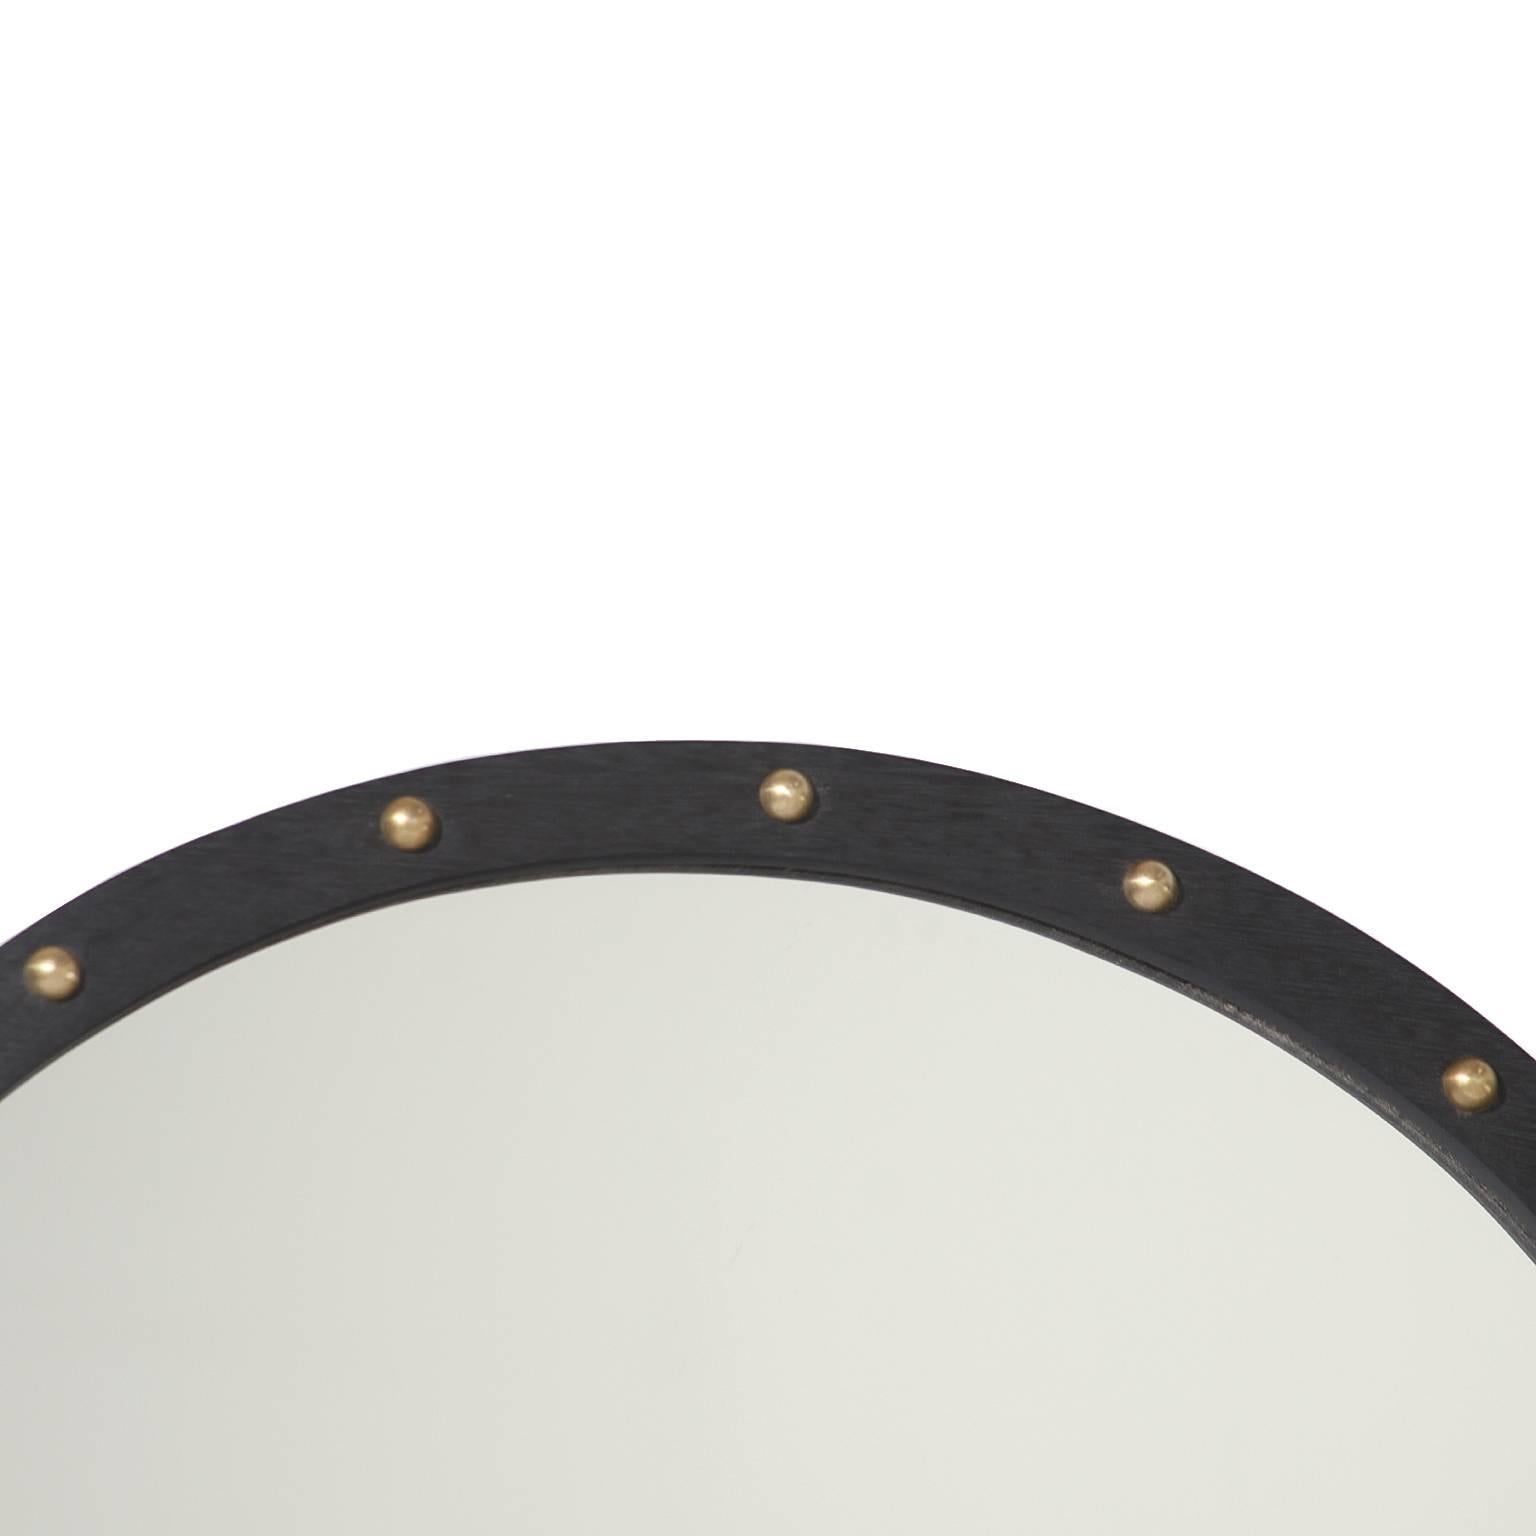 A lovely round mirror in Brazilian Exotic Hardwood with a sculpted edge and adorned with patinated bronze half circles. This mirror has a charcoal oil finished with brushed brass details. 

We have four available 

Many pieces are stored in our